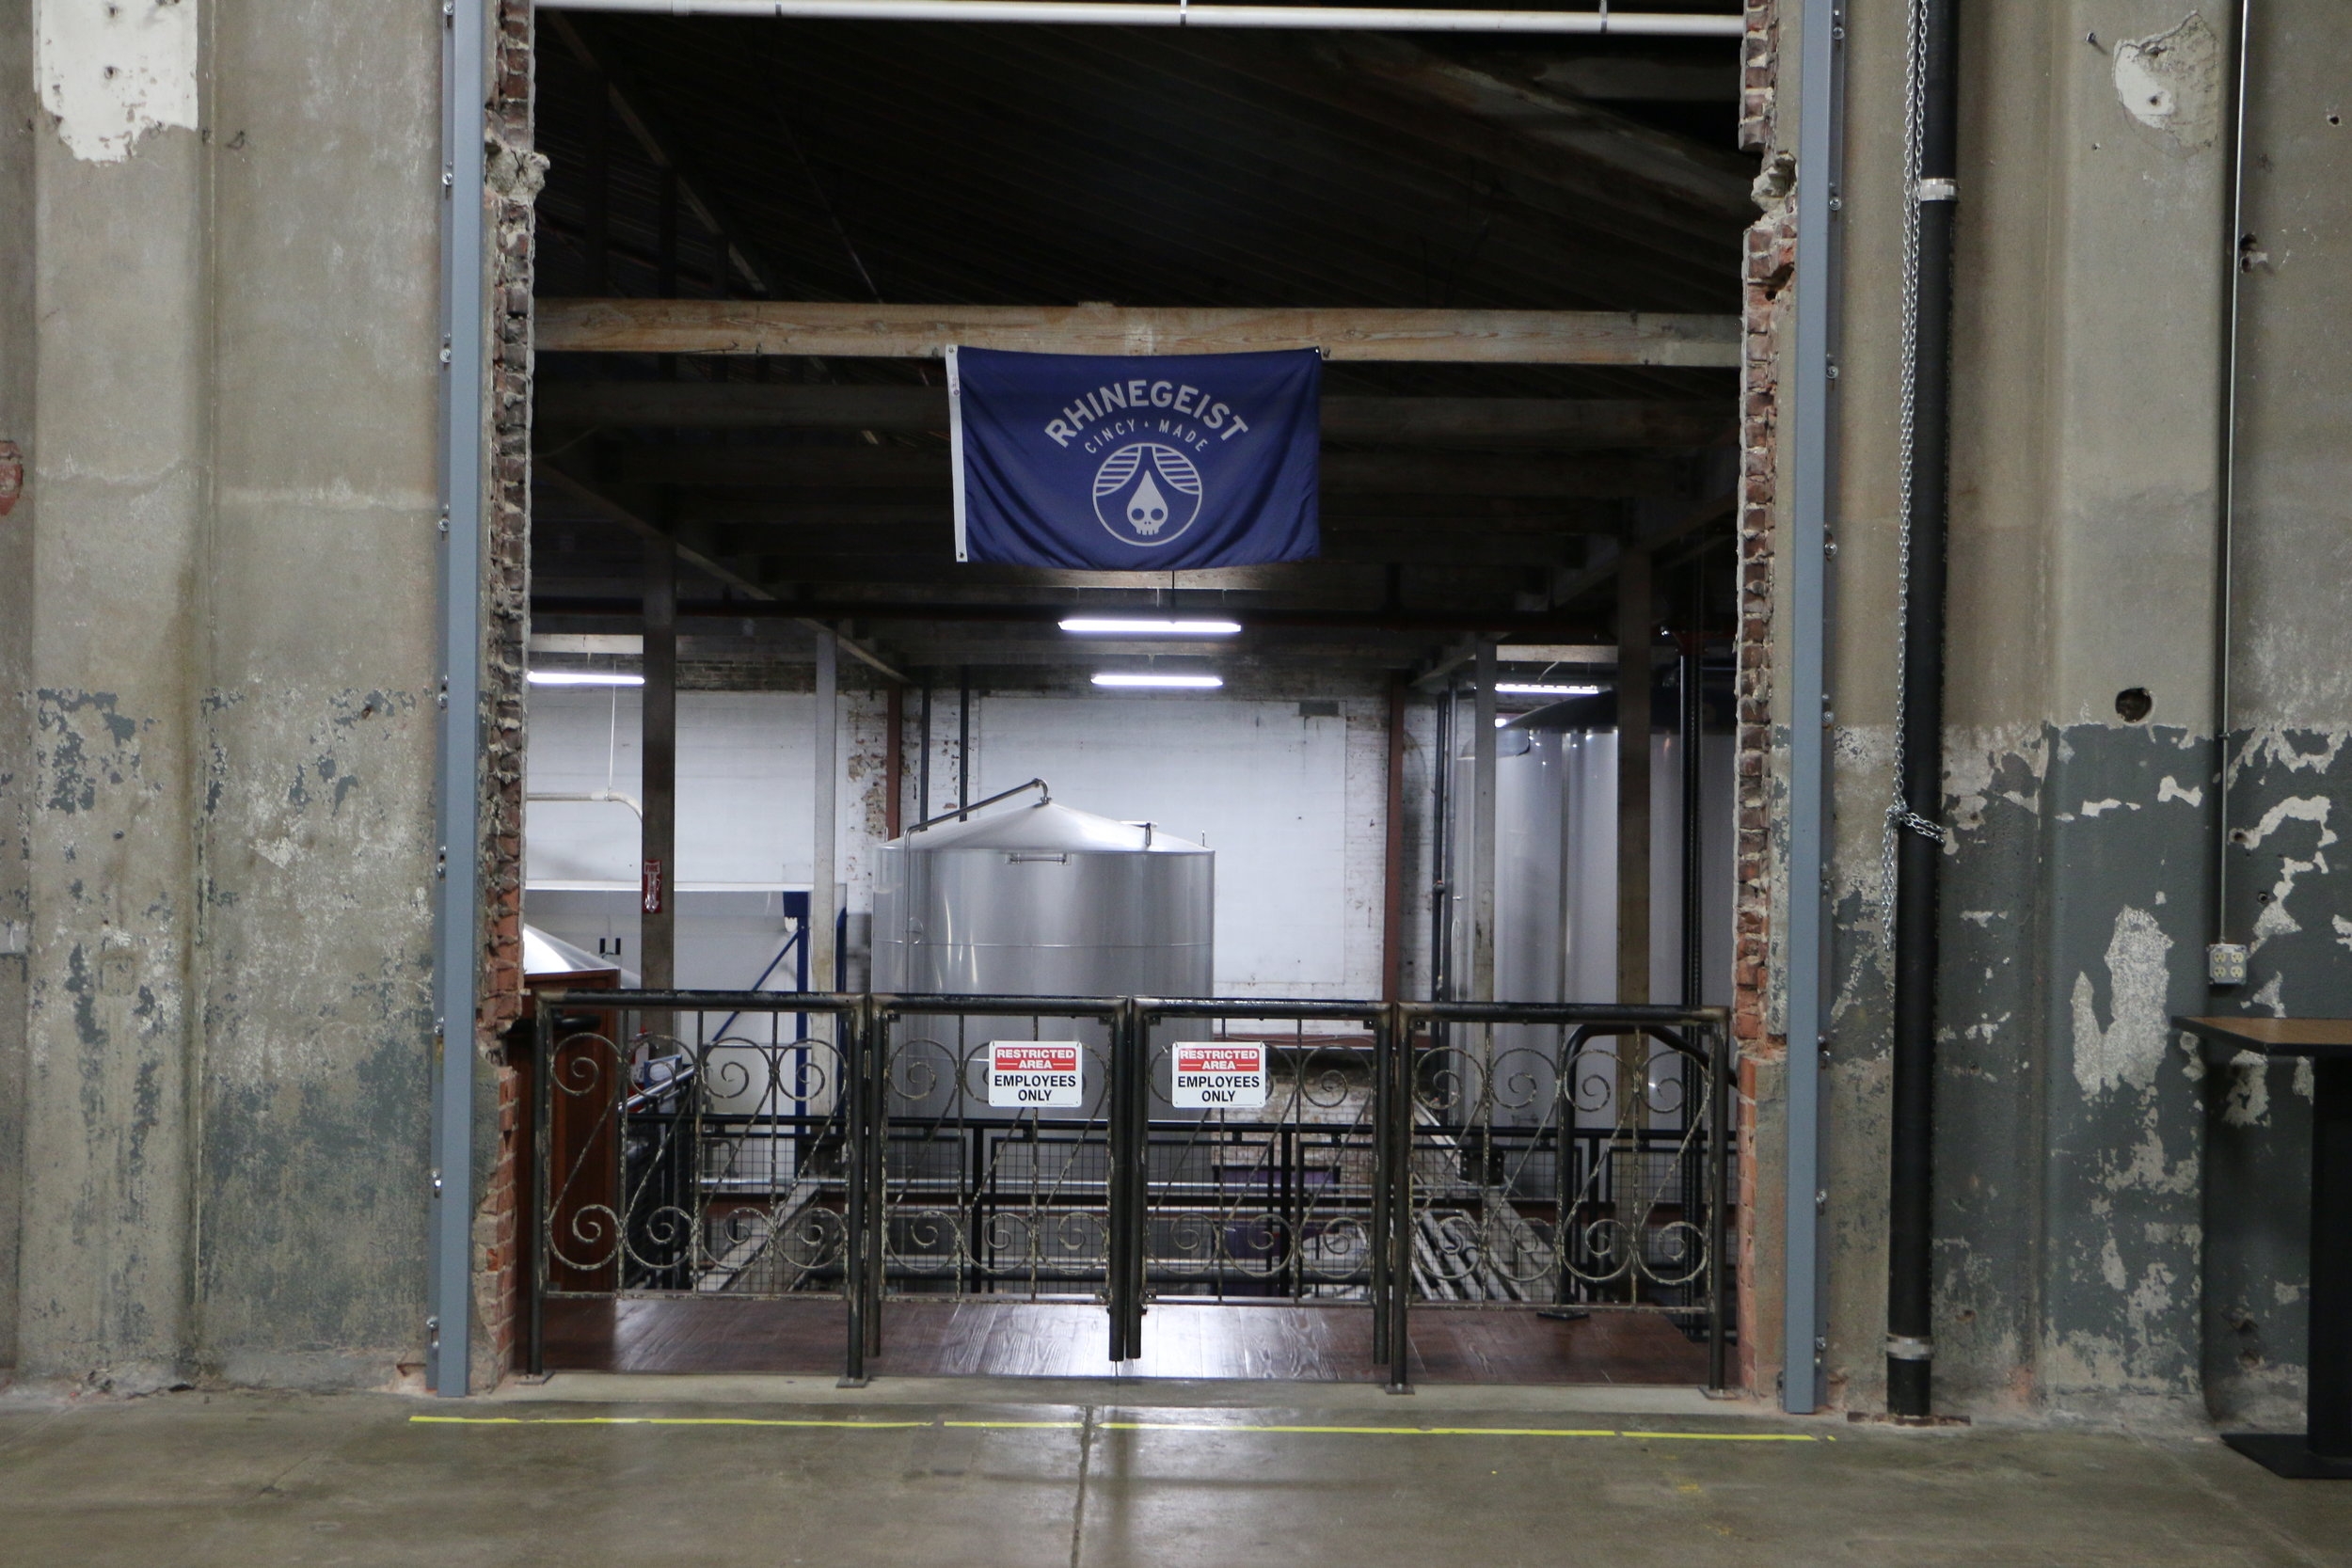 Authenticity & Awesomeness: Bryant Goulding of Rhinegeist Brewery